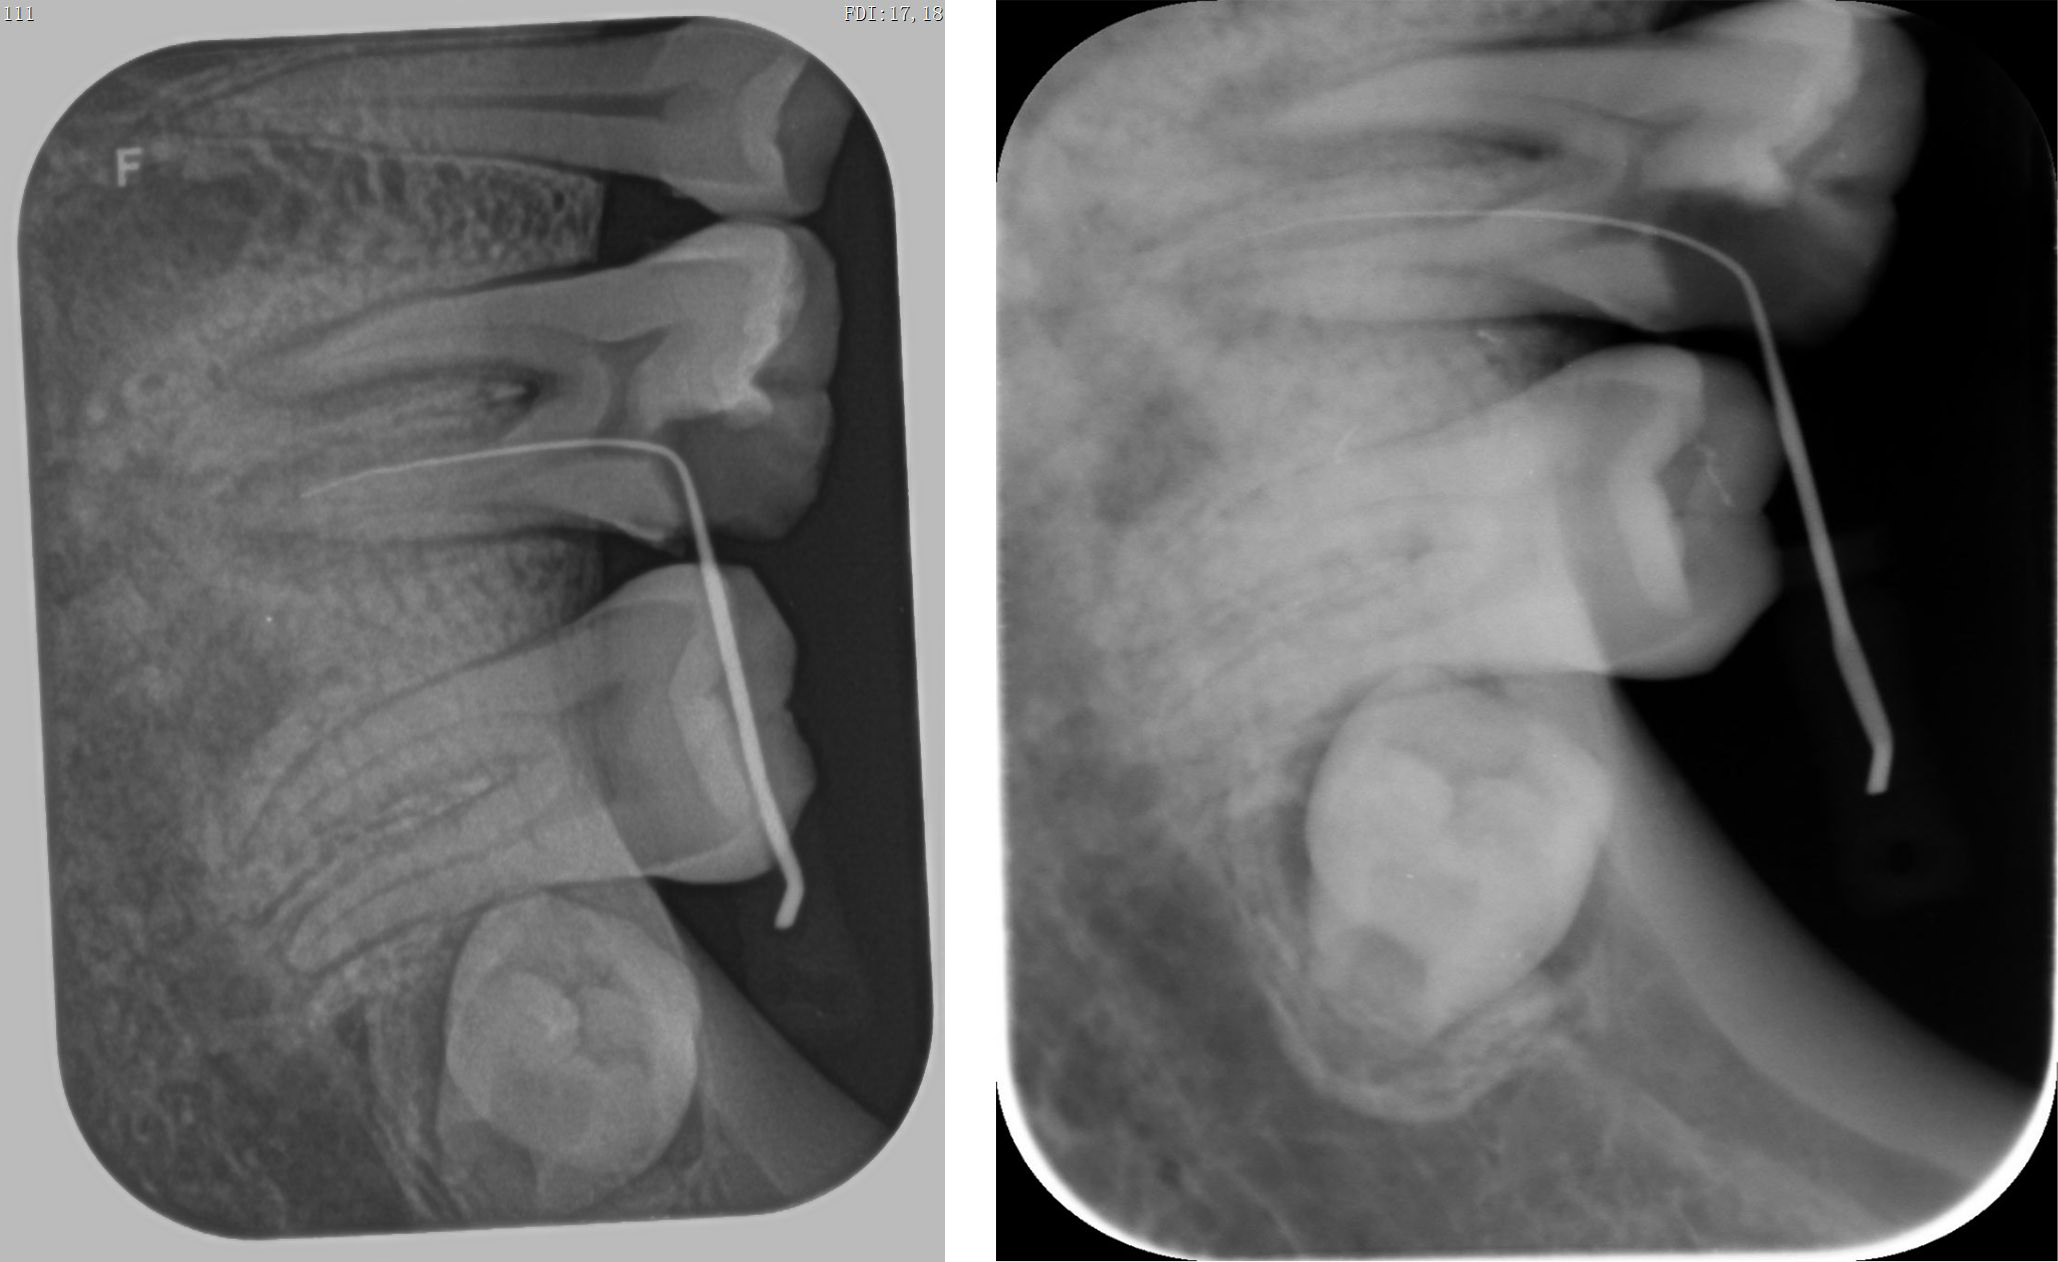 Lead shielding for dental x-rays: A thing of the past? | Dentistry IQ